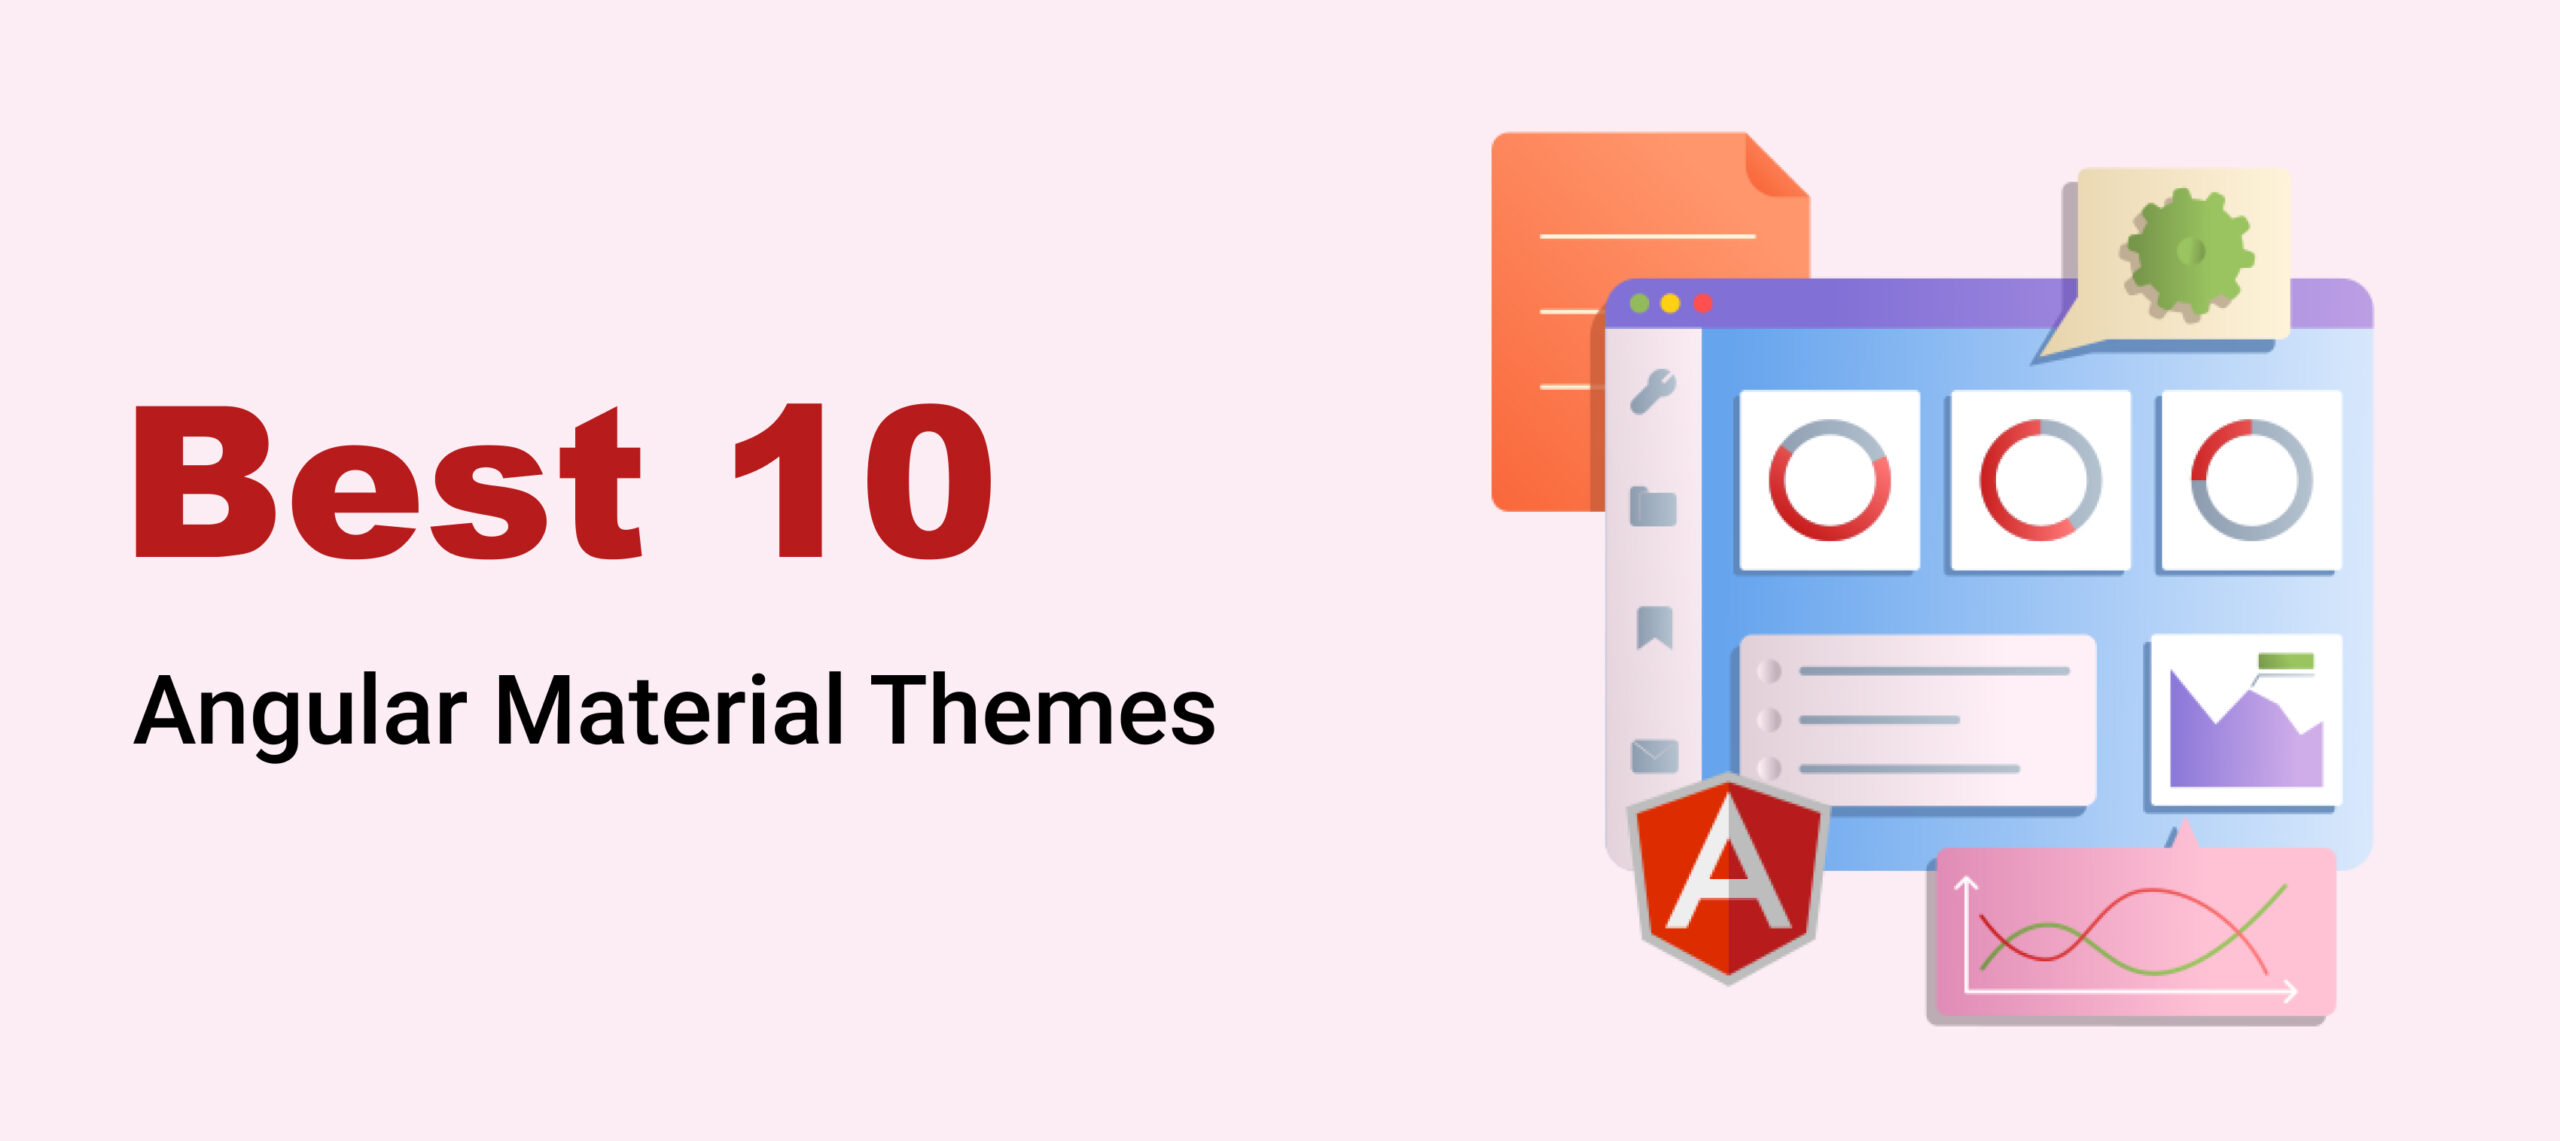  Best 10 Angular Material Themes